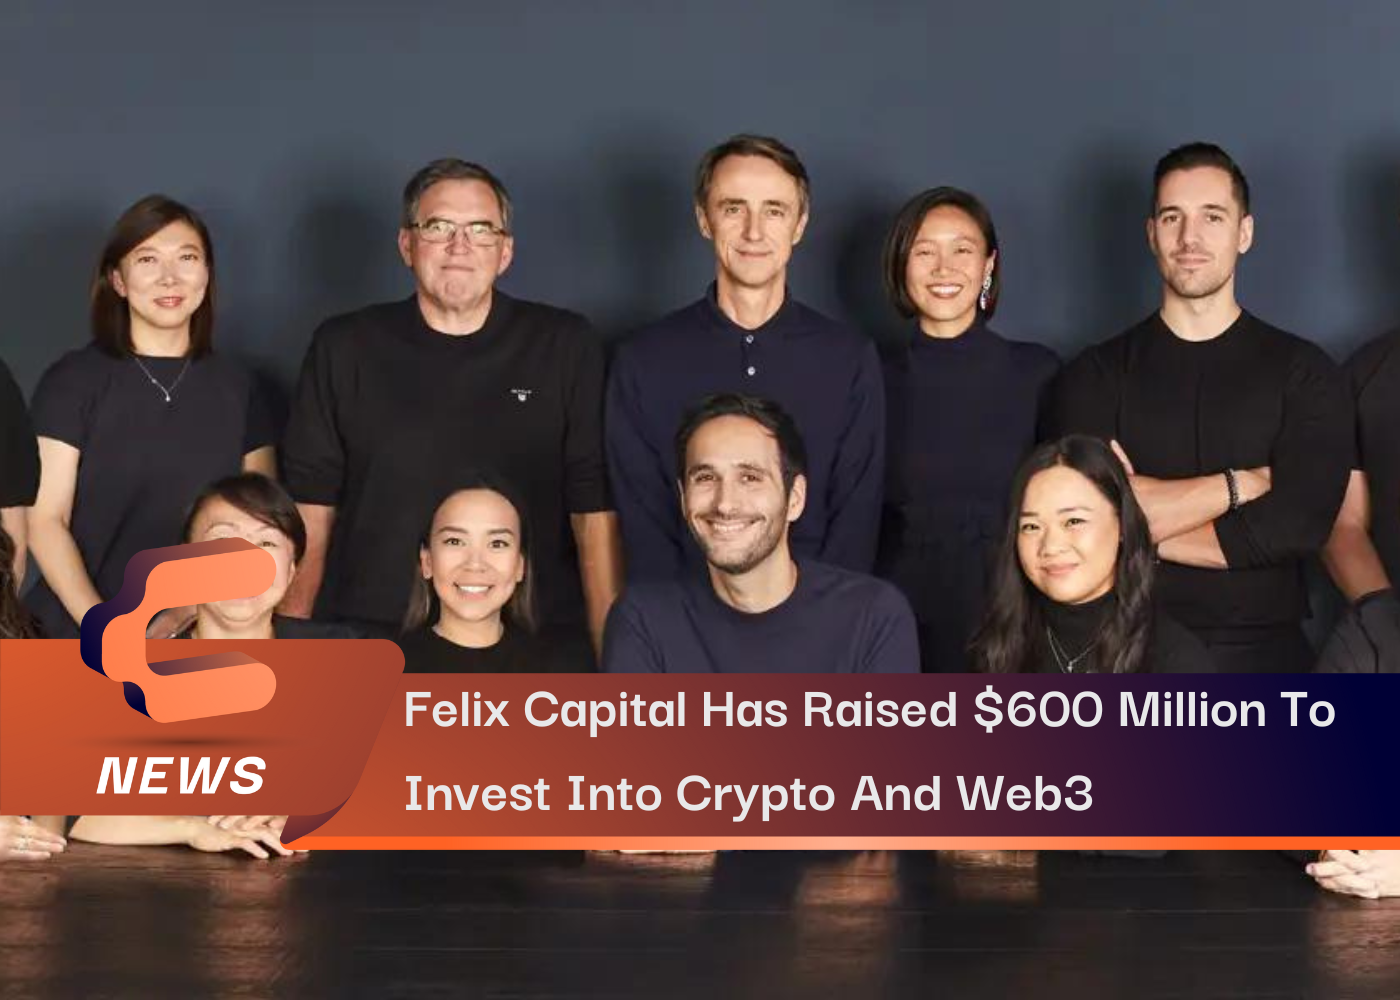 Felix Capital Has Raised 600 Million To Invest Into Crypto And Web3